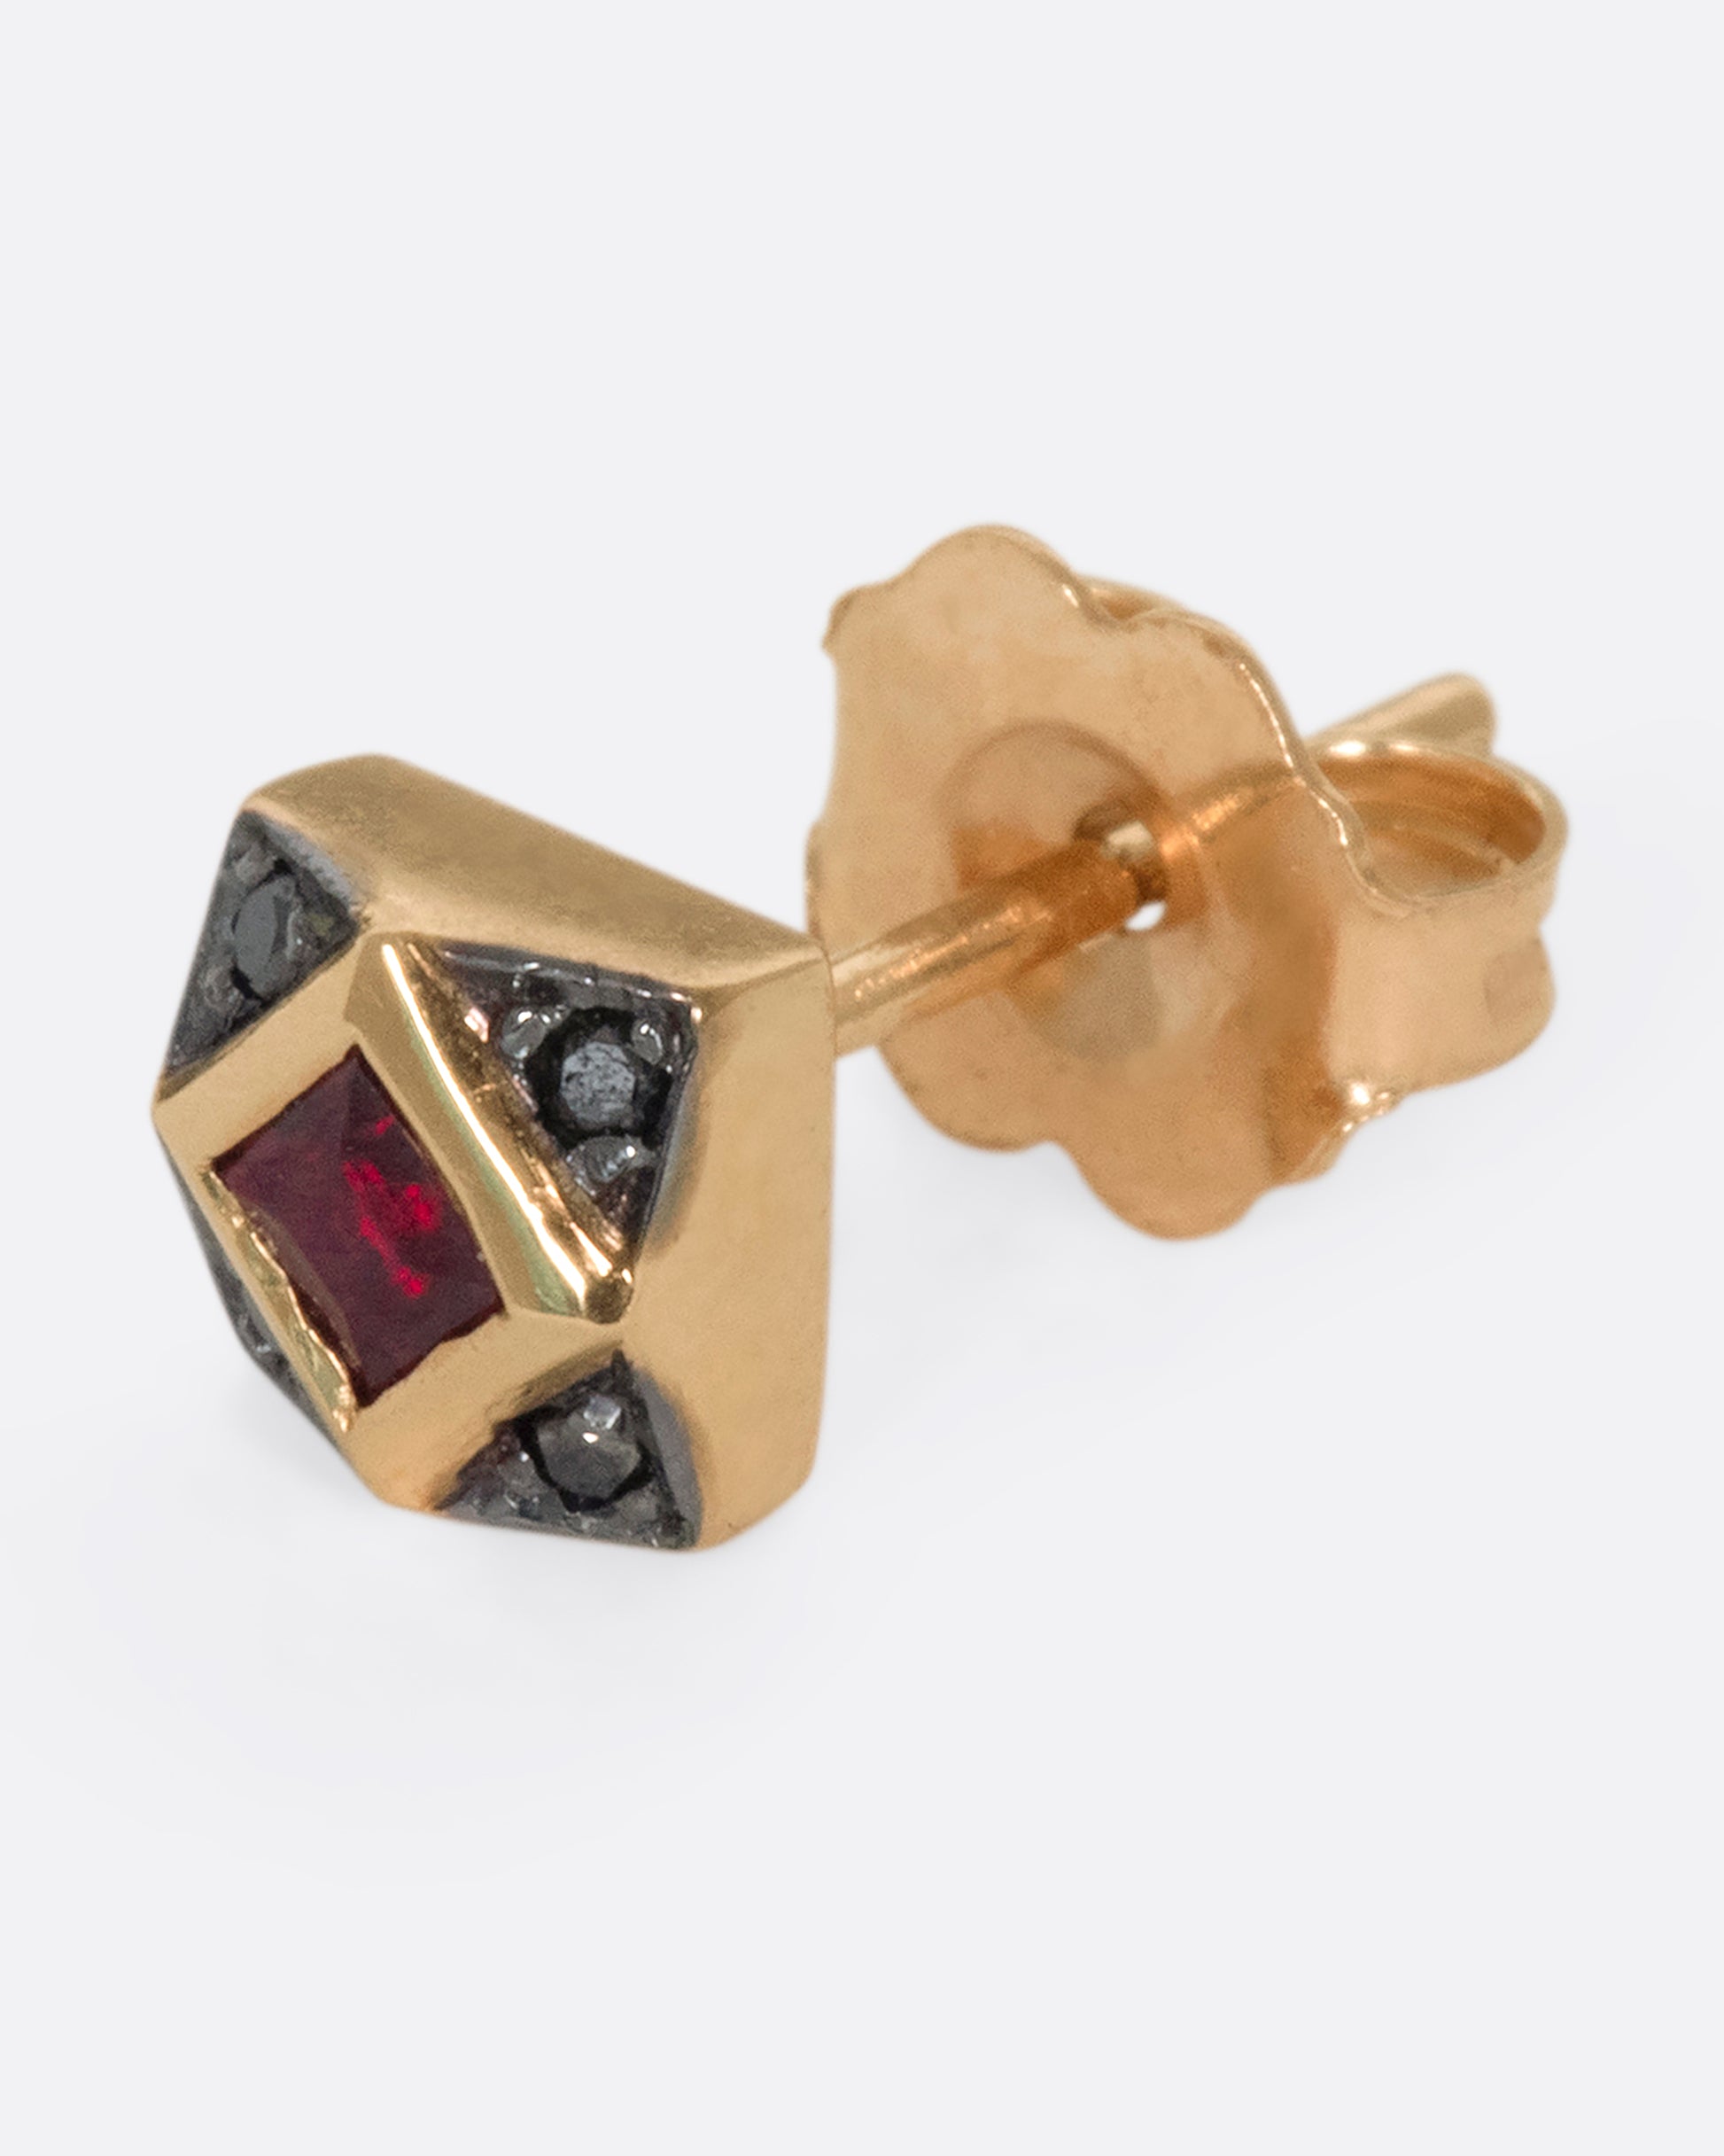 A 14k rose gold diamond stud featuring a princess cut ruby surrounded by four black diamonds